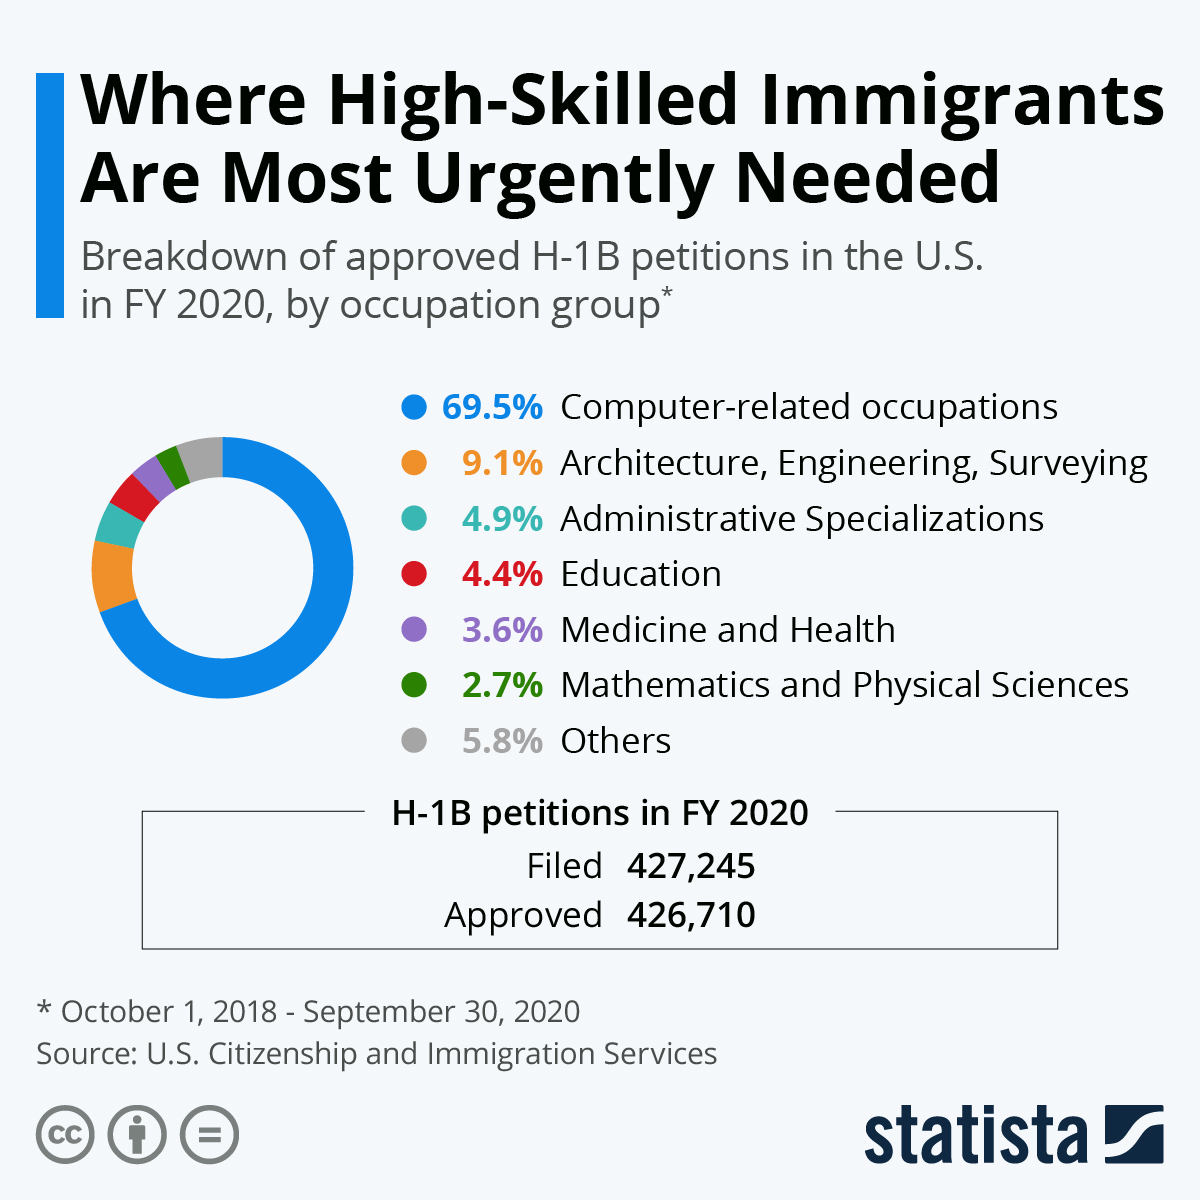 Where High-Skilled Immigrants Are Most Urgently Needed